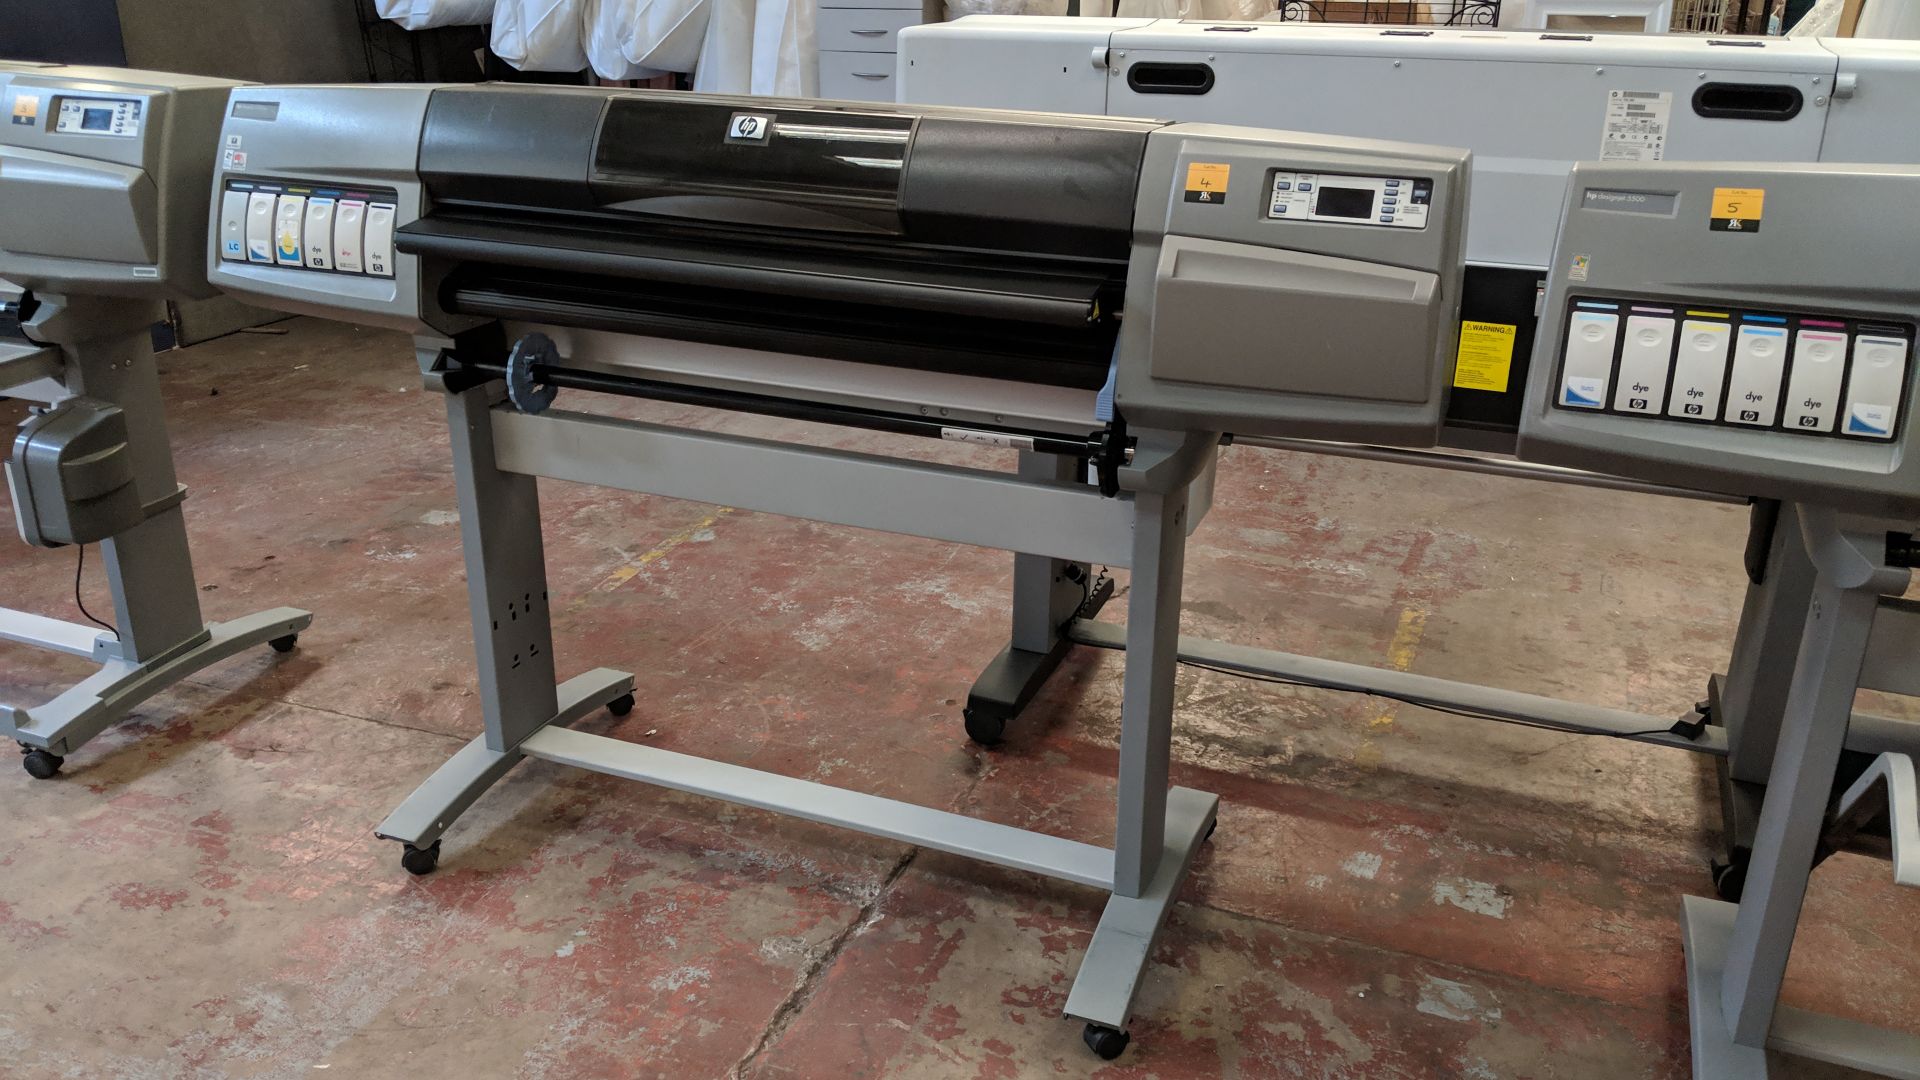 HP DesignJet 5500PS wide format printer, model Q1251/2A. 42 inch width IMPORTANT: Please remember - Image 4 of 8